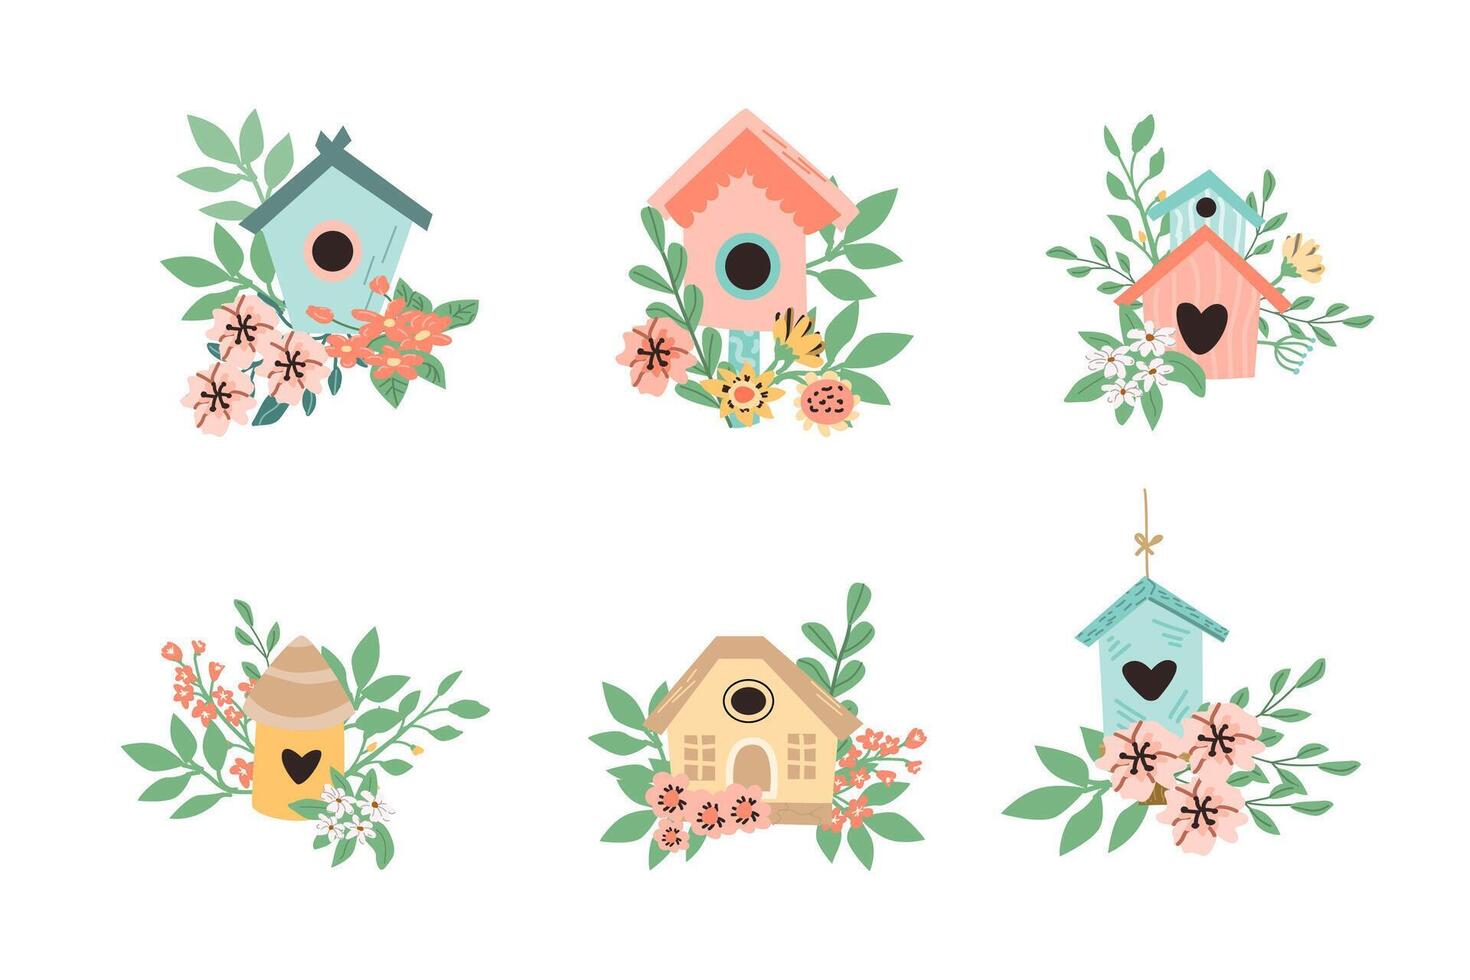 Hand drawn set of bird houses with floral elements. Vector illustration can used for greeting card, summer or spring decor. Cute birdhouses and bouquets.